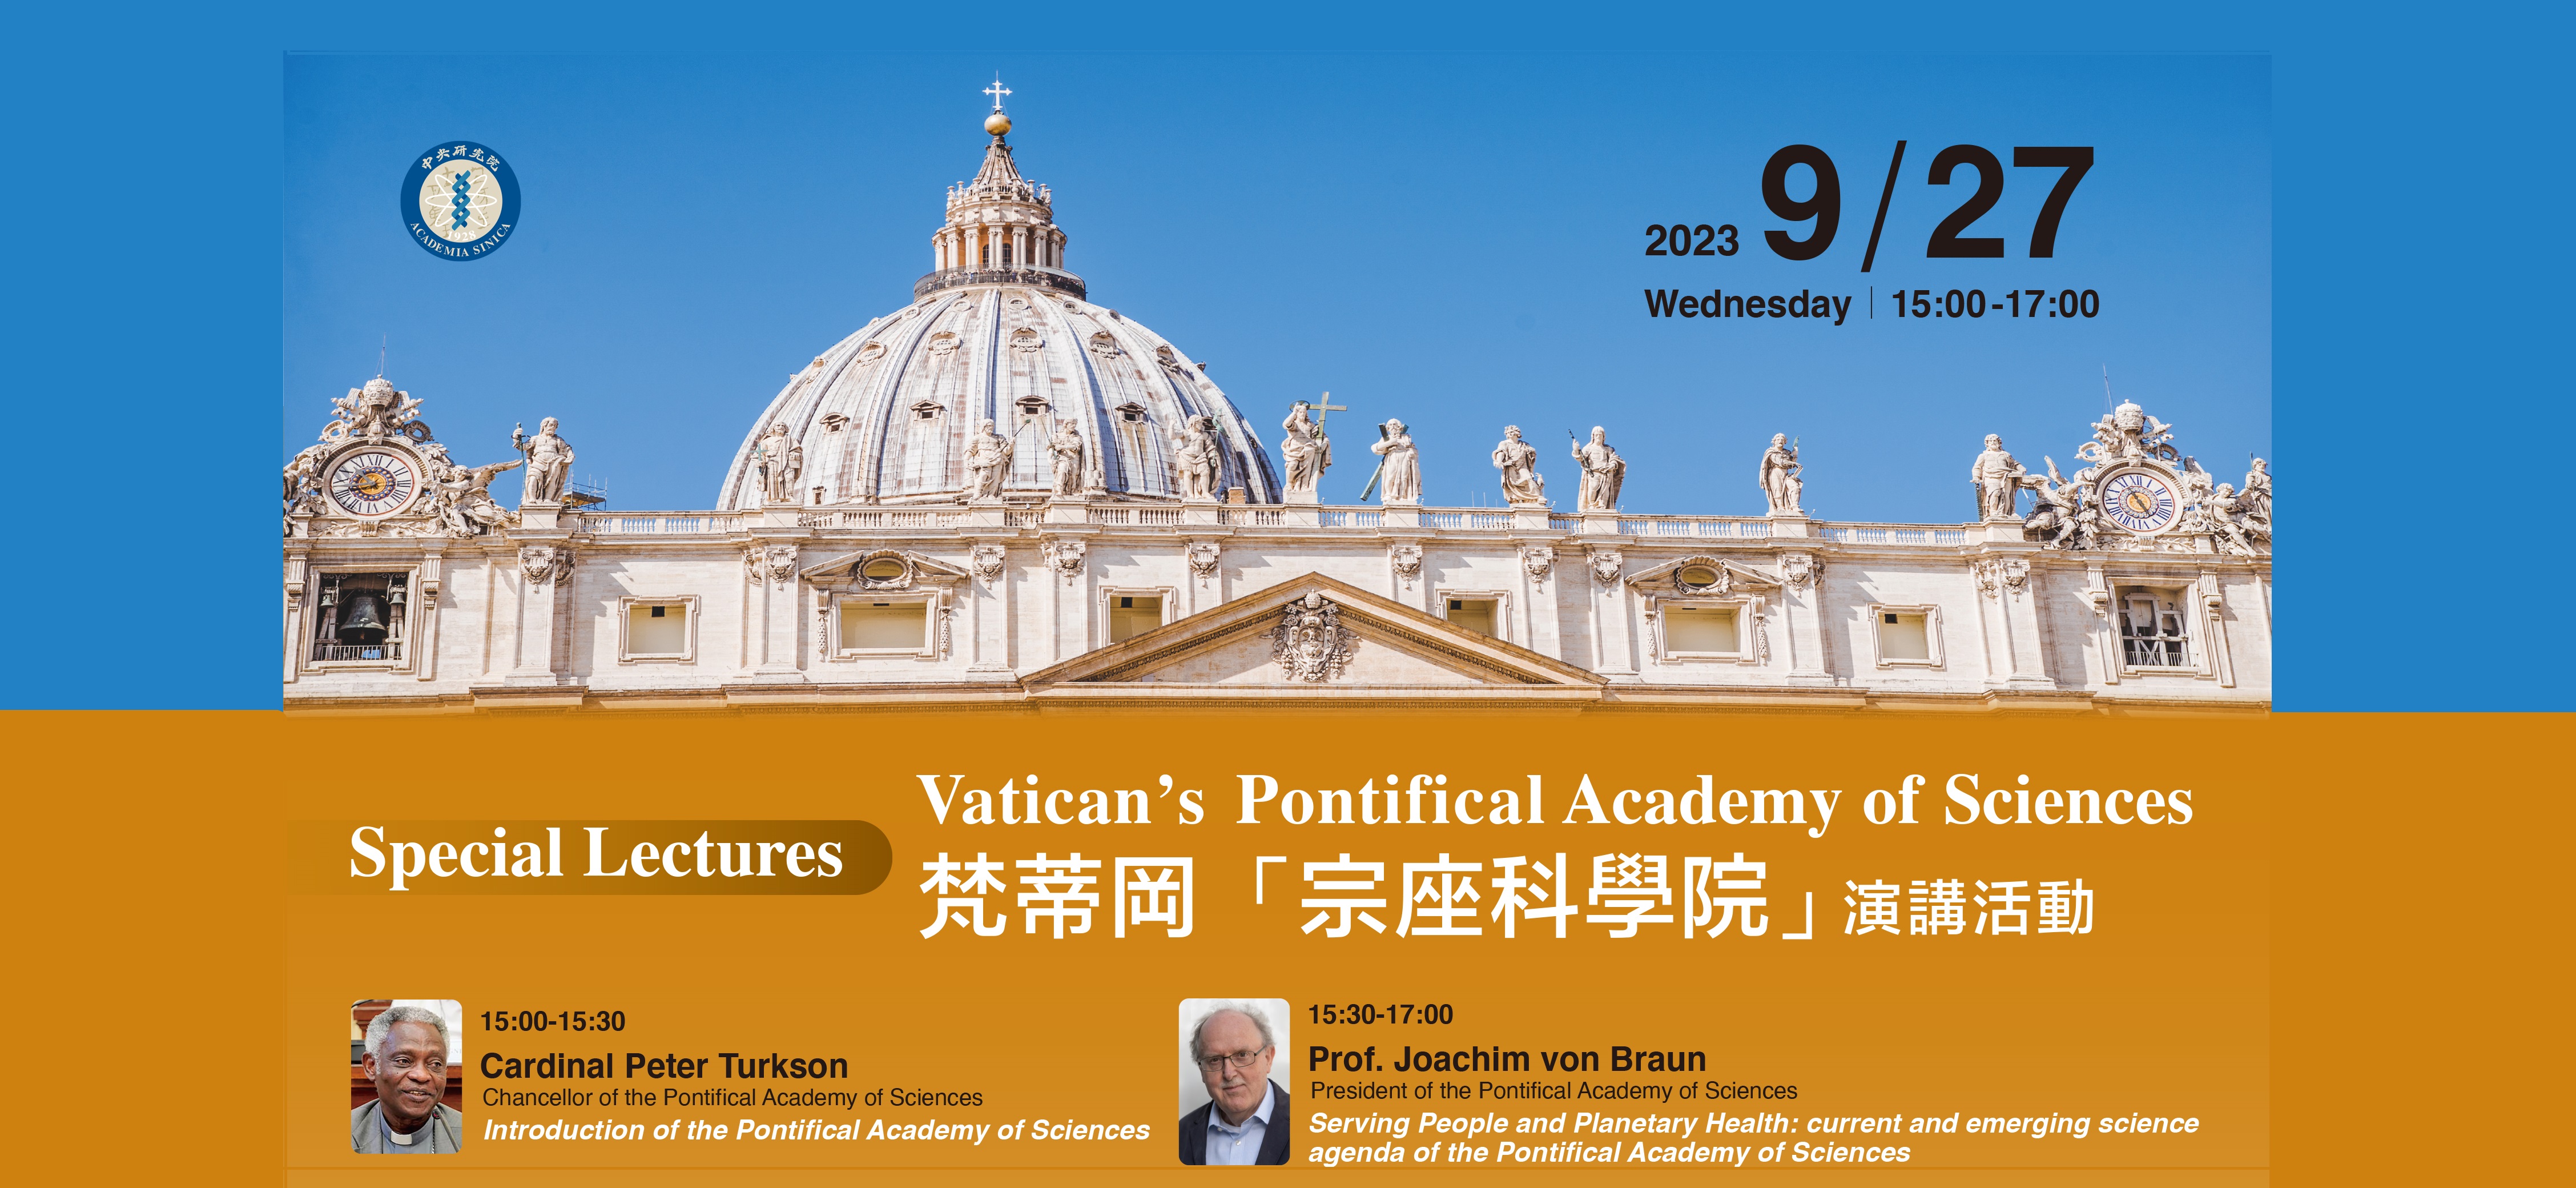 Special Lectures-Serving People and Planetary Health: current and emerging science agenda of the Pontifical Academy of Sciences